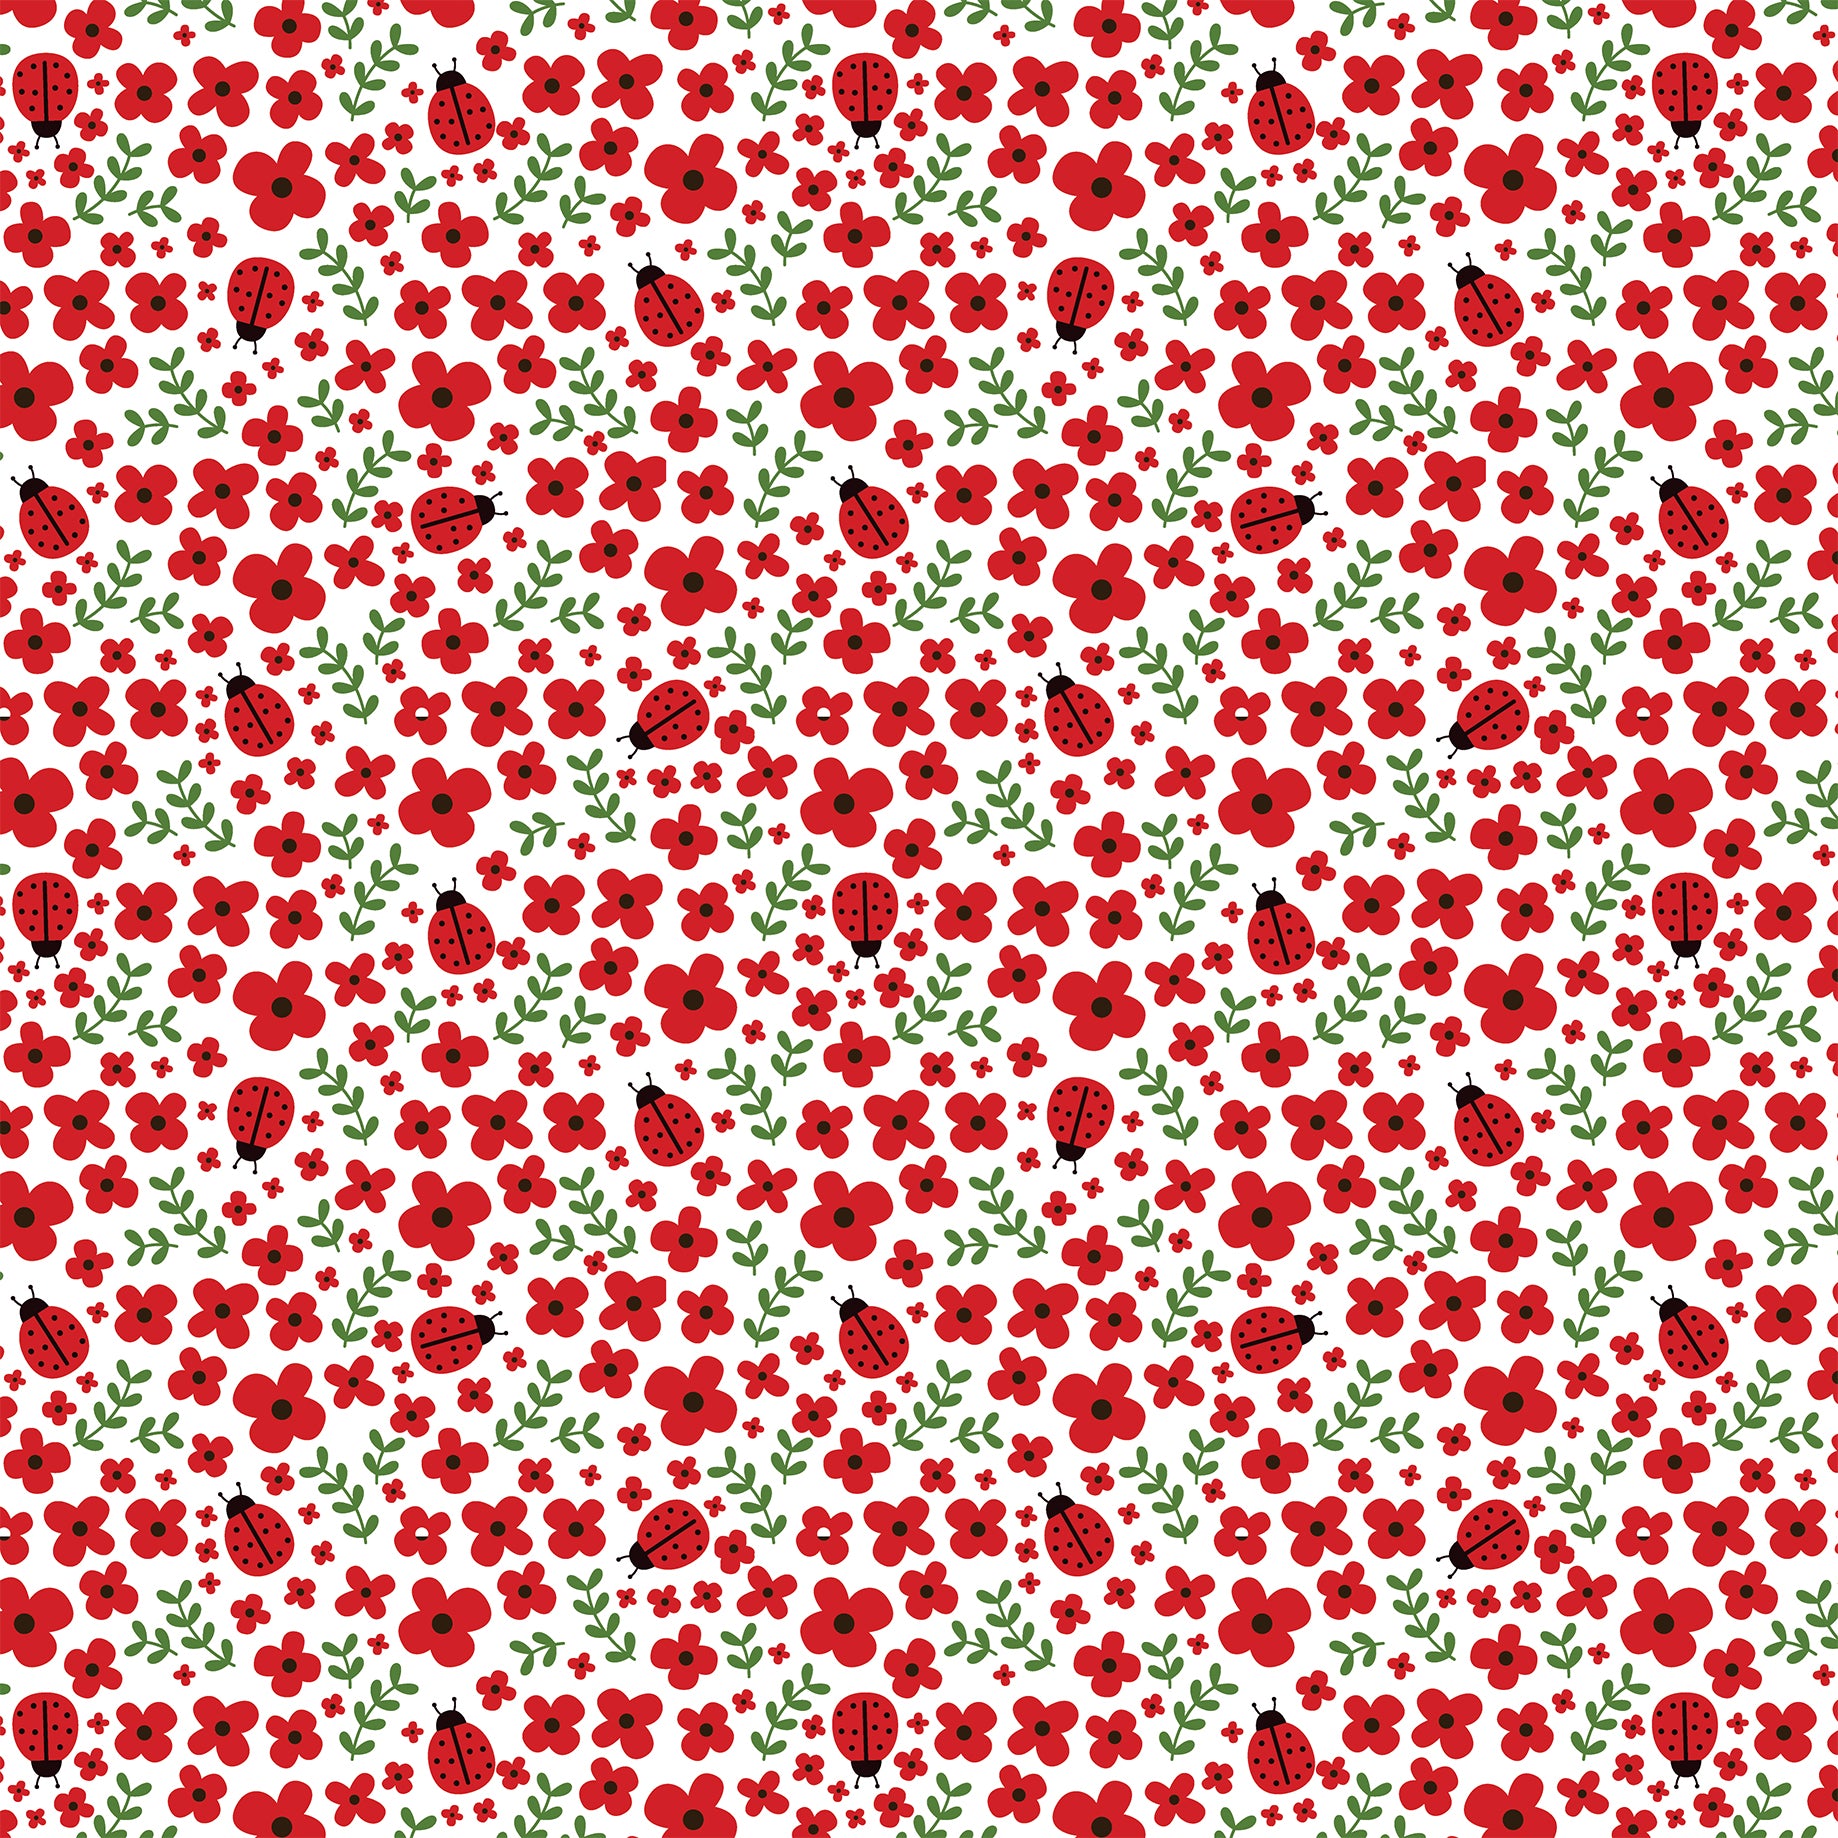 Little Ladybug Collection Ladybug Hugs 12 x 12 Double-Sided Scrapbook Paper by Echo Park Paper